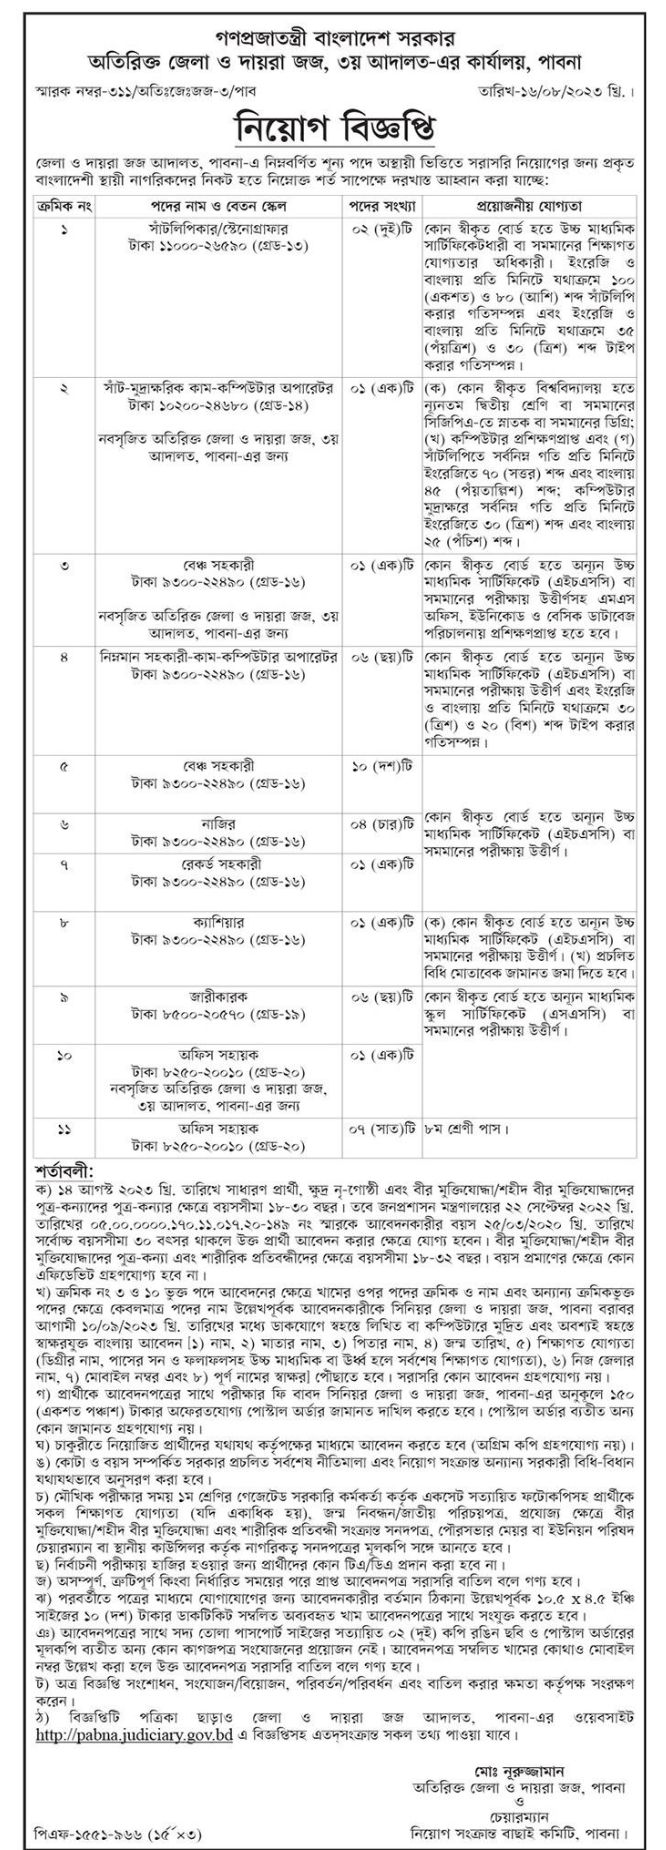 Office of the Additional District and Sessions Judge Job Circular